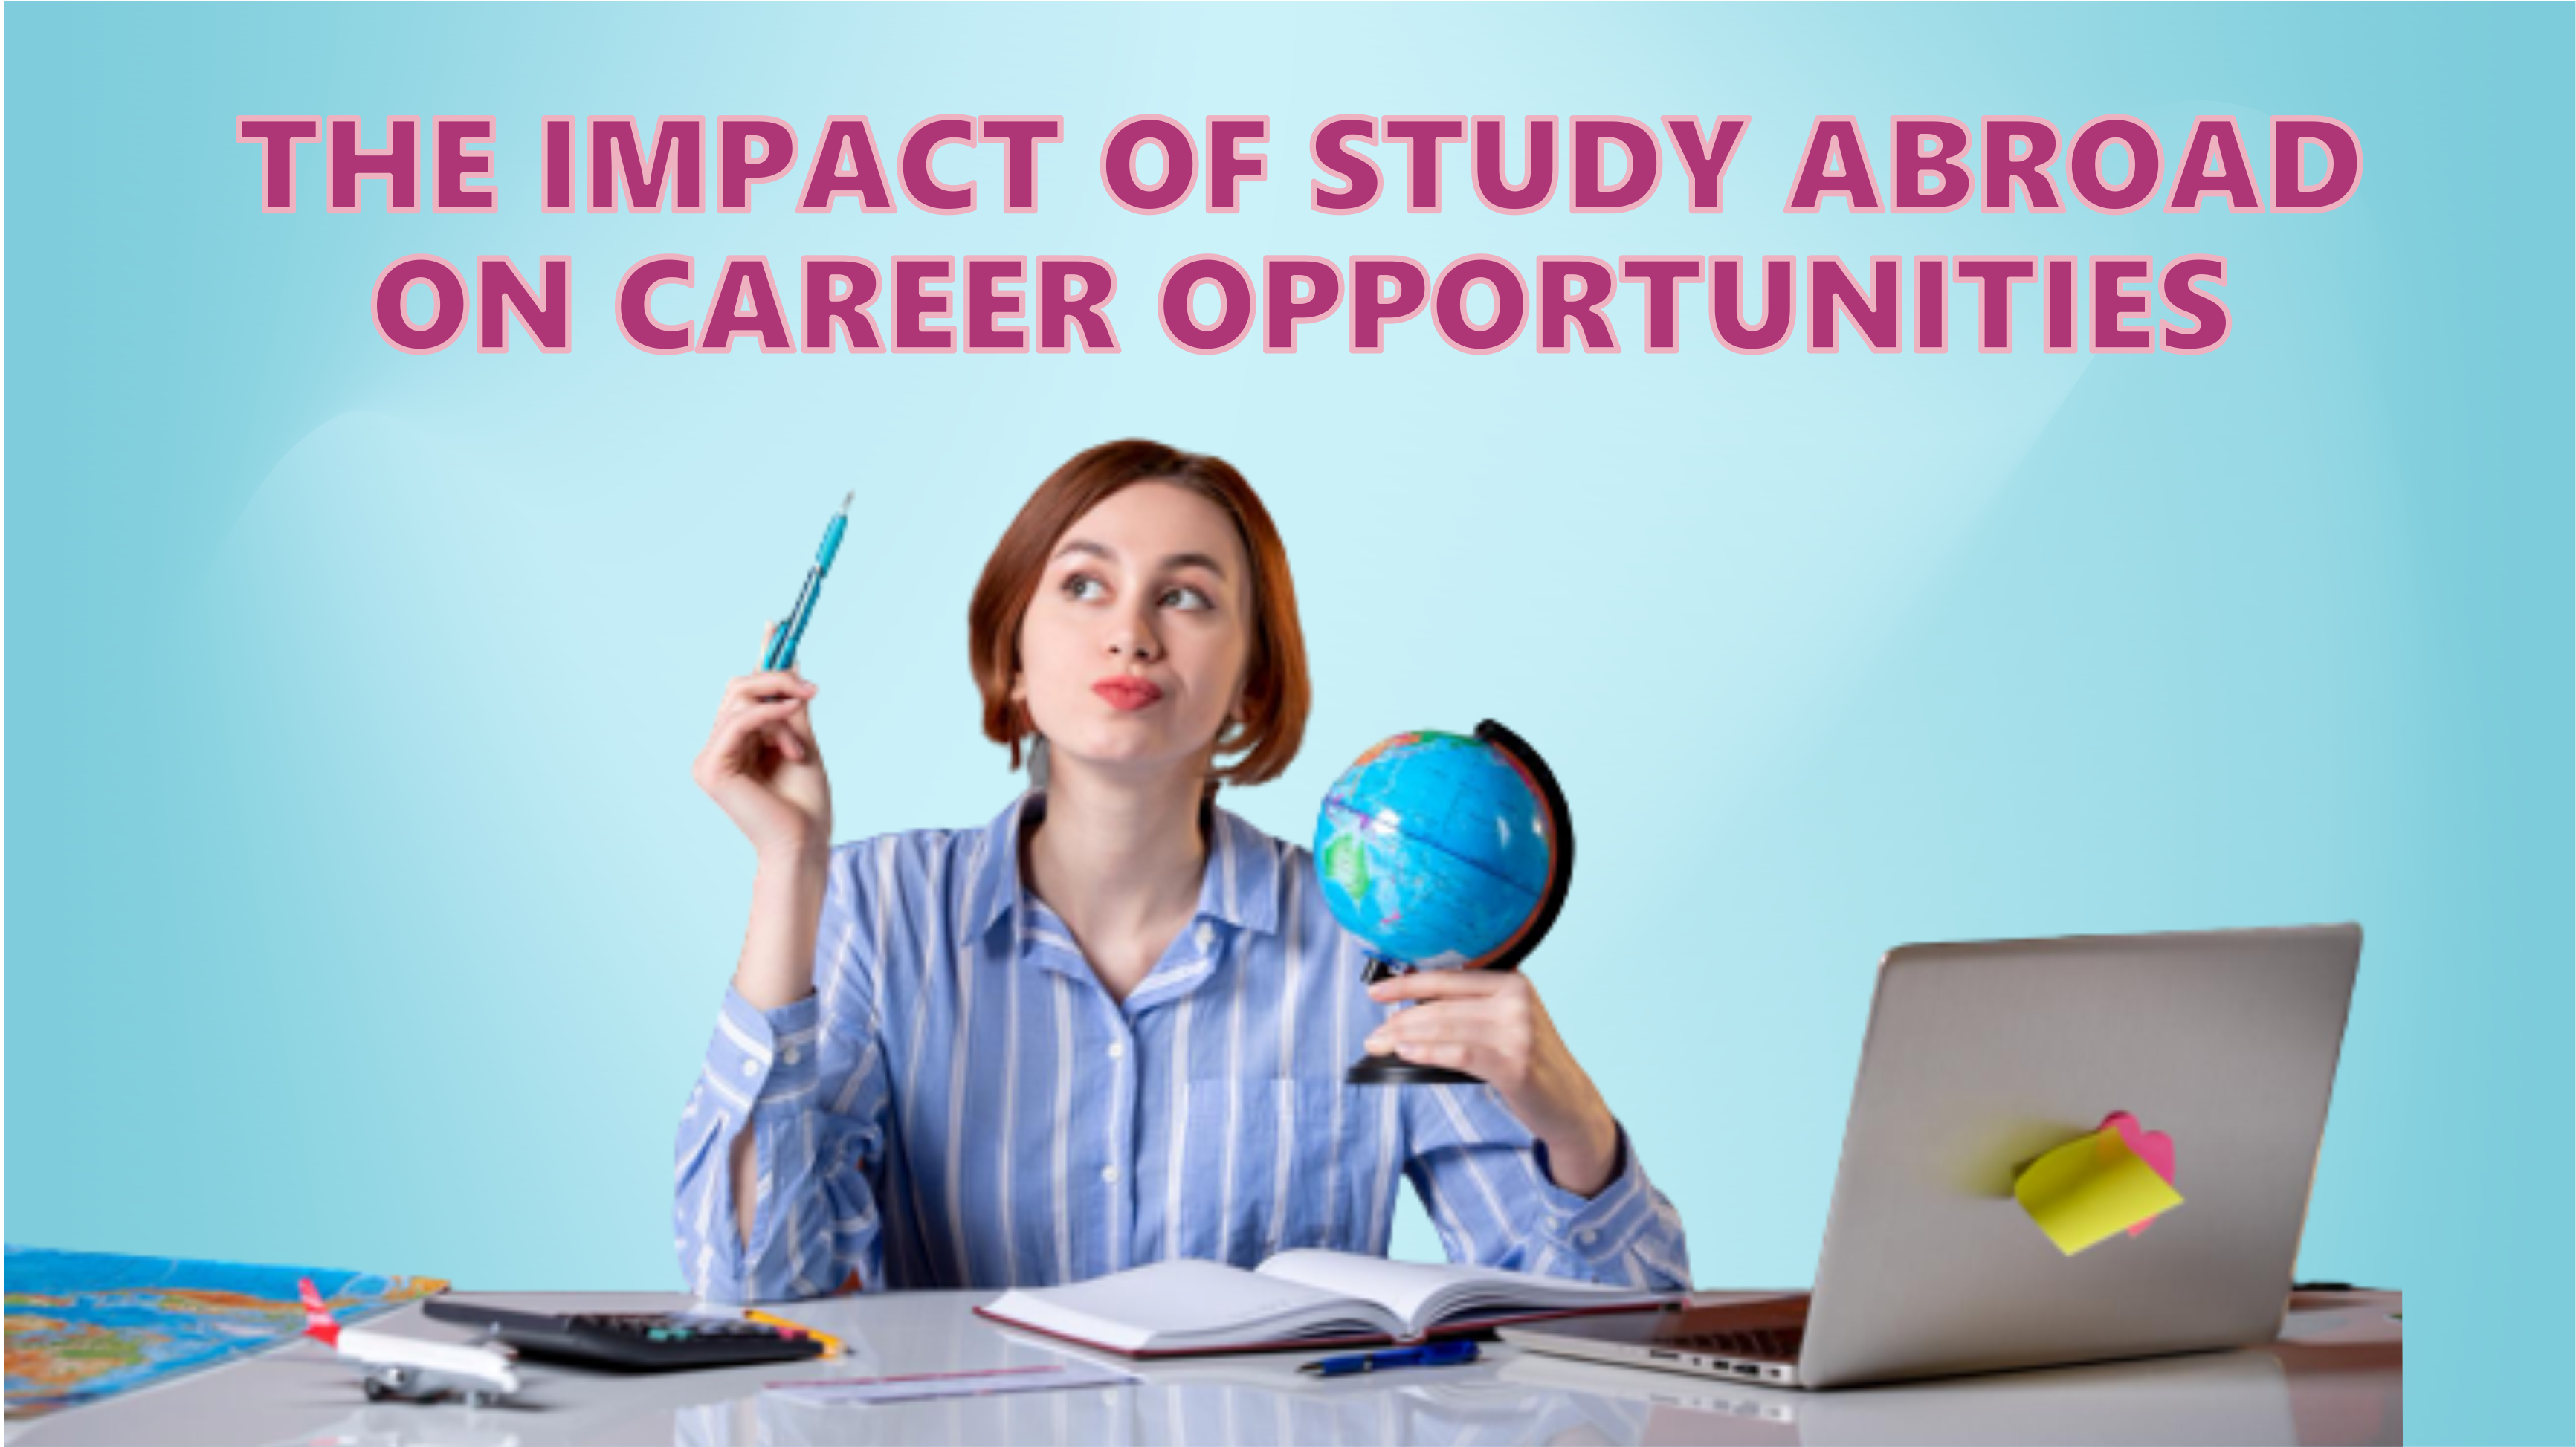 The impact of study abroad on career opportunities